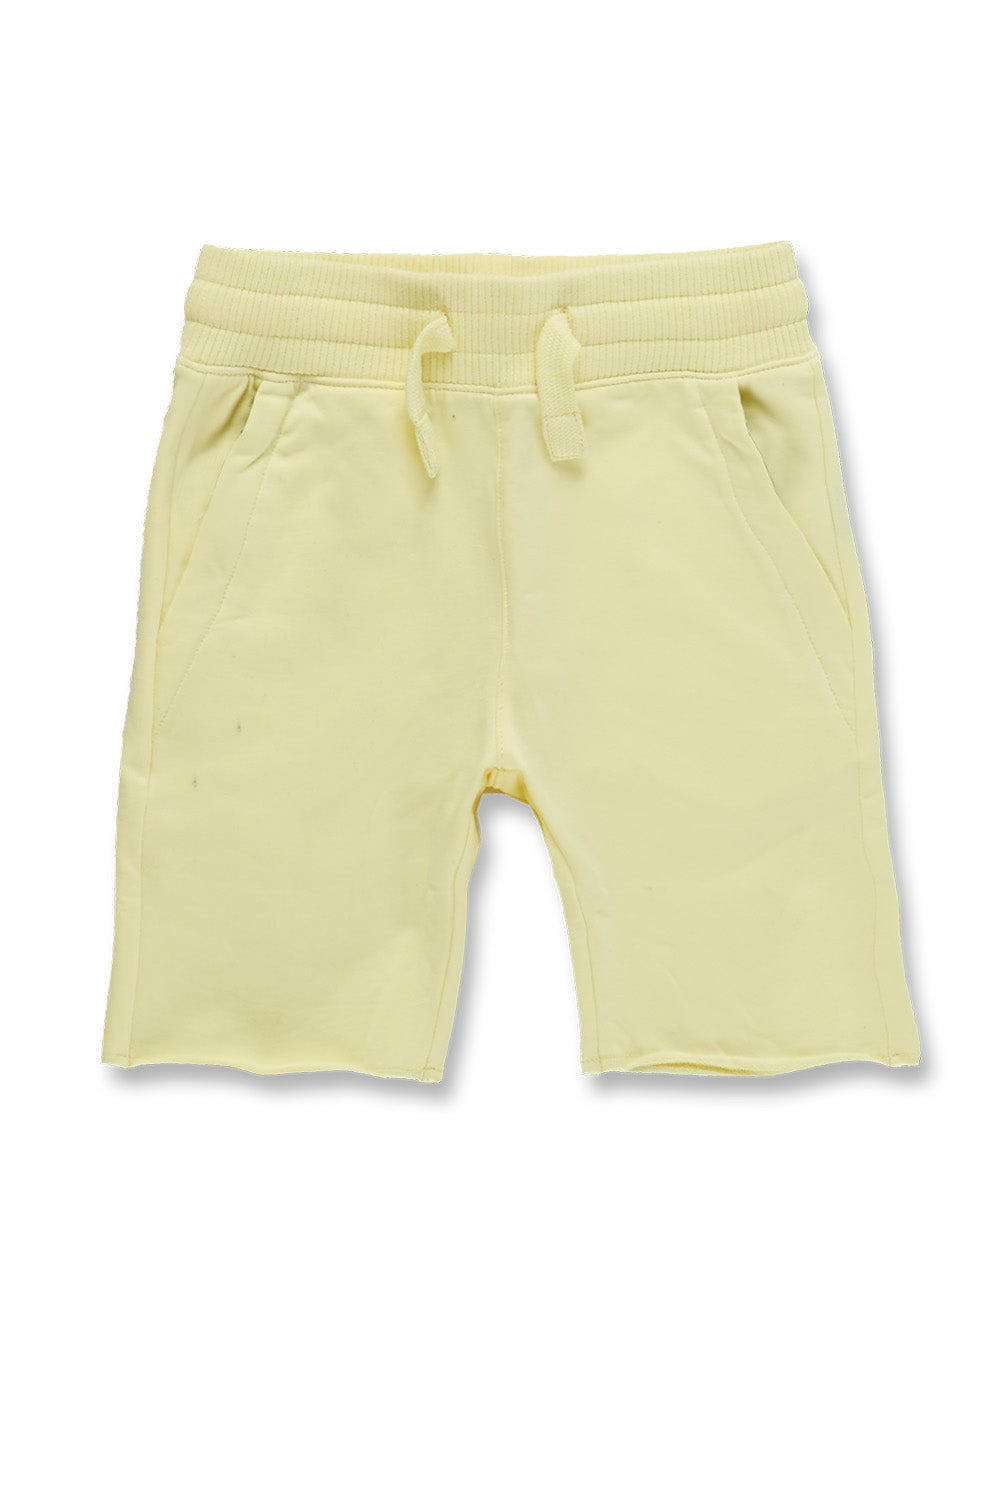 JC Kids Kids Palma French Terry Shorts (Exclusive Colors) Pale Yellow / 2